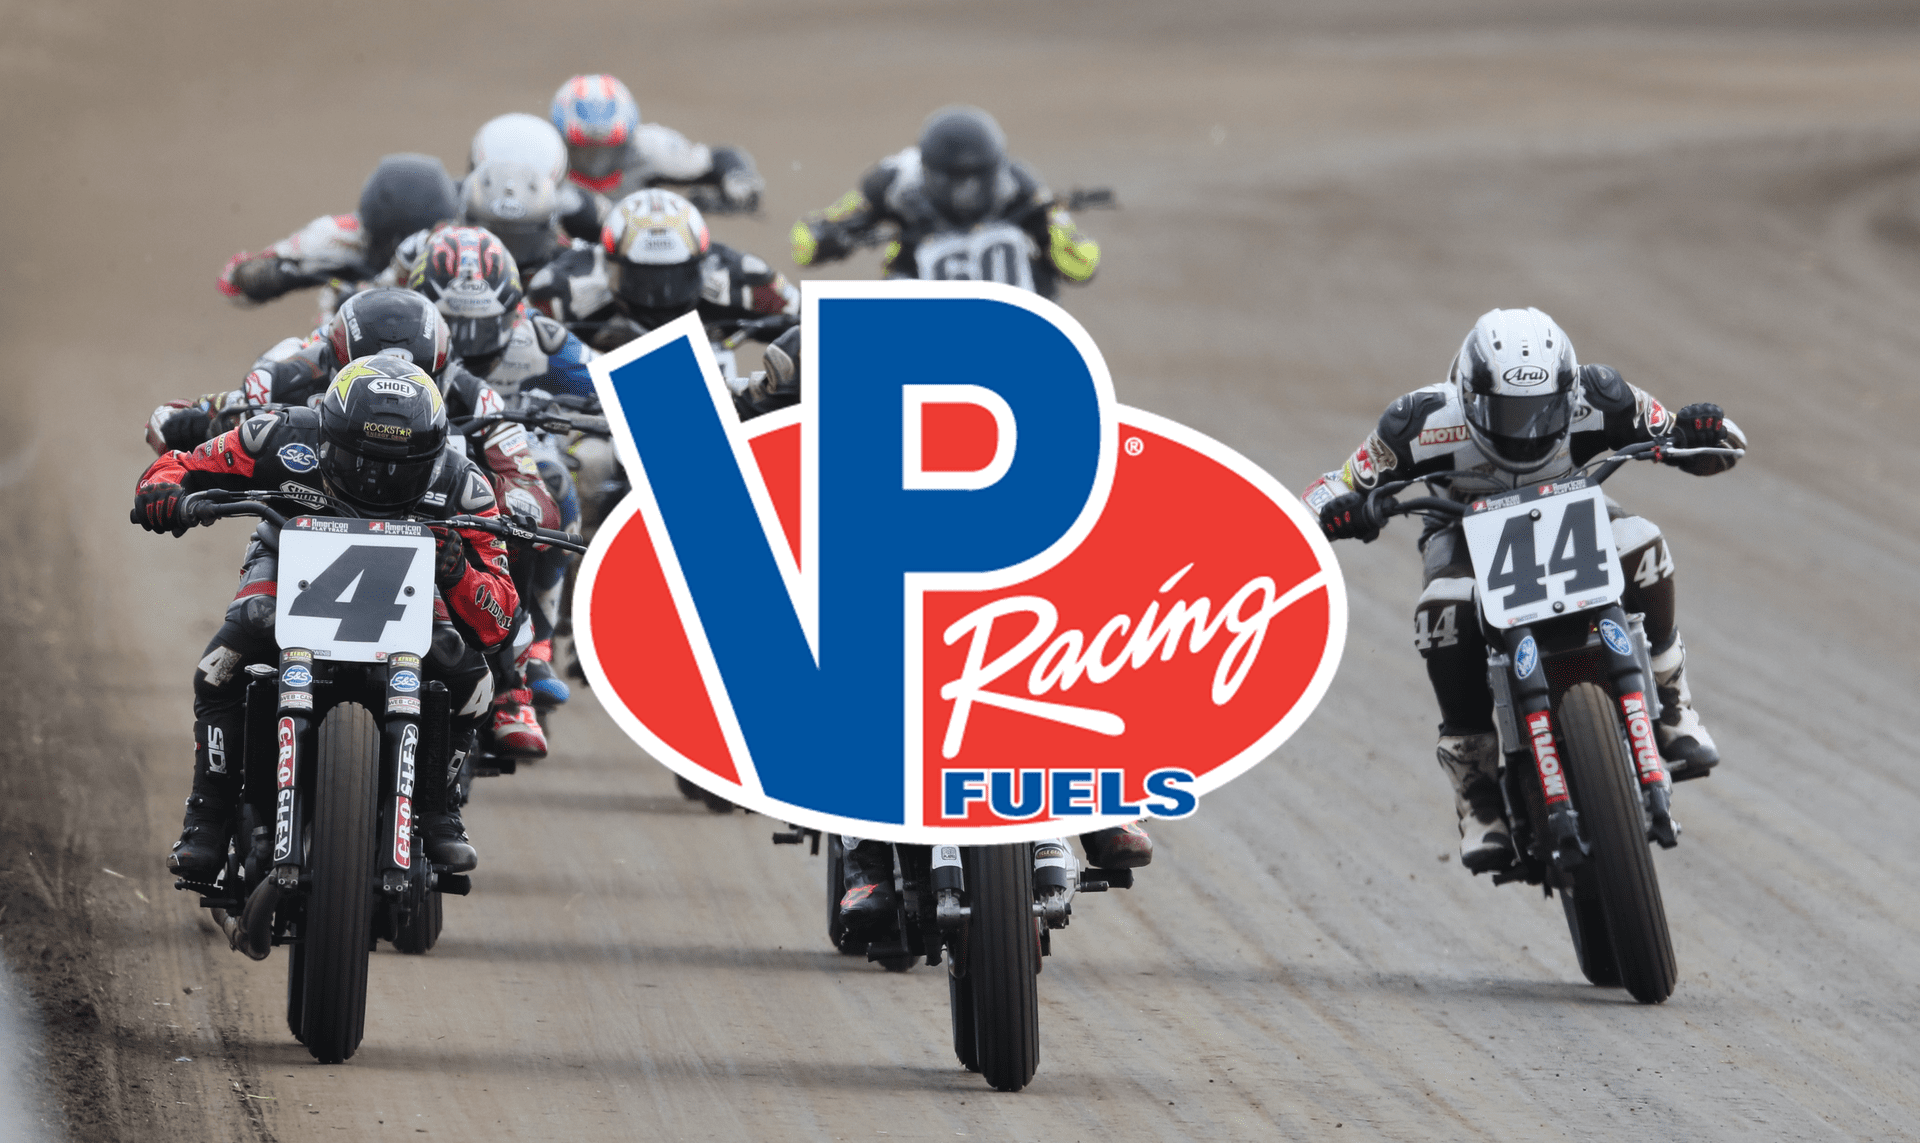 VP Racing Fuels has been named the official spec fuel of American Flat Track.